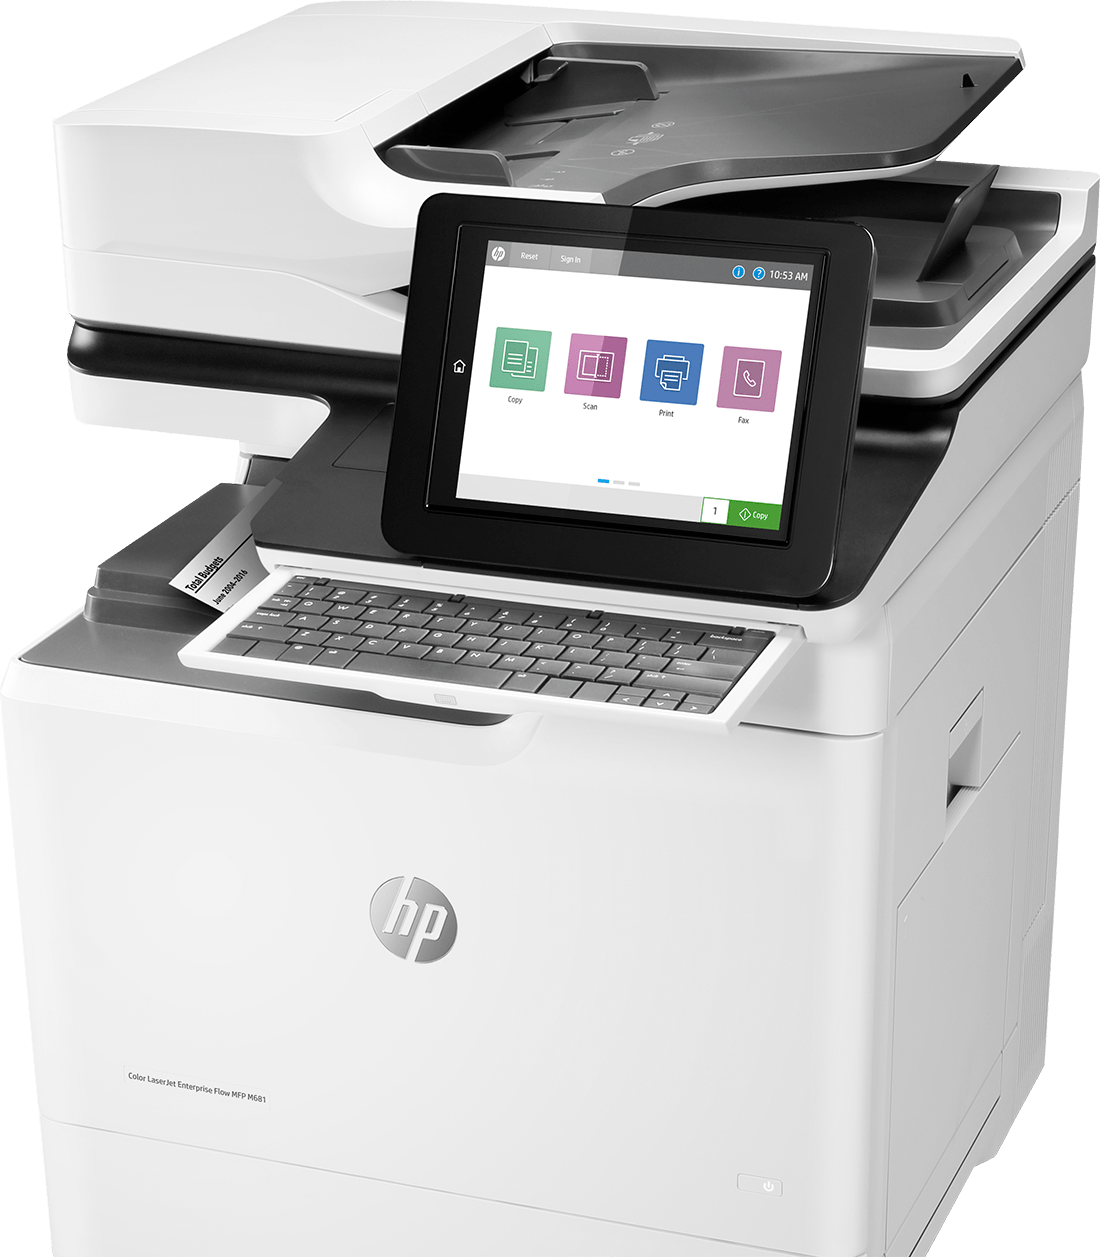 SMALL BUSINESS PRINTER LEASE